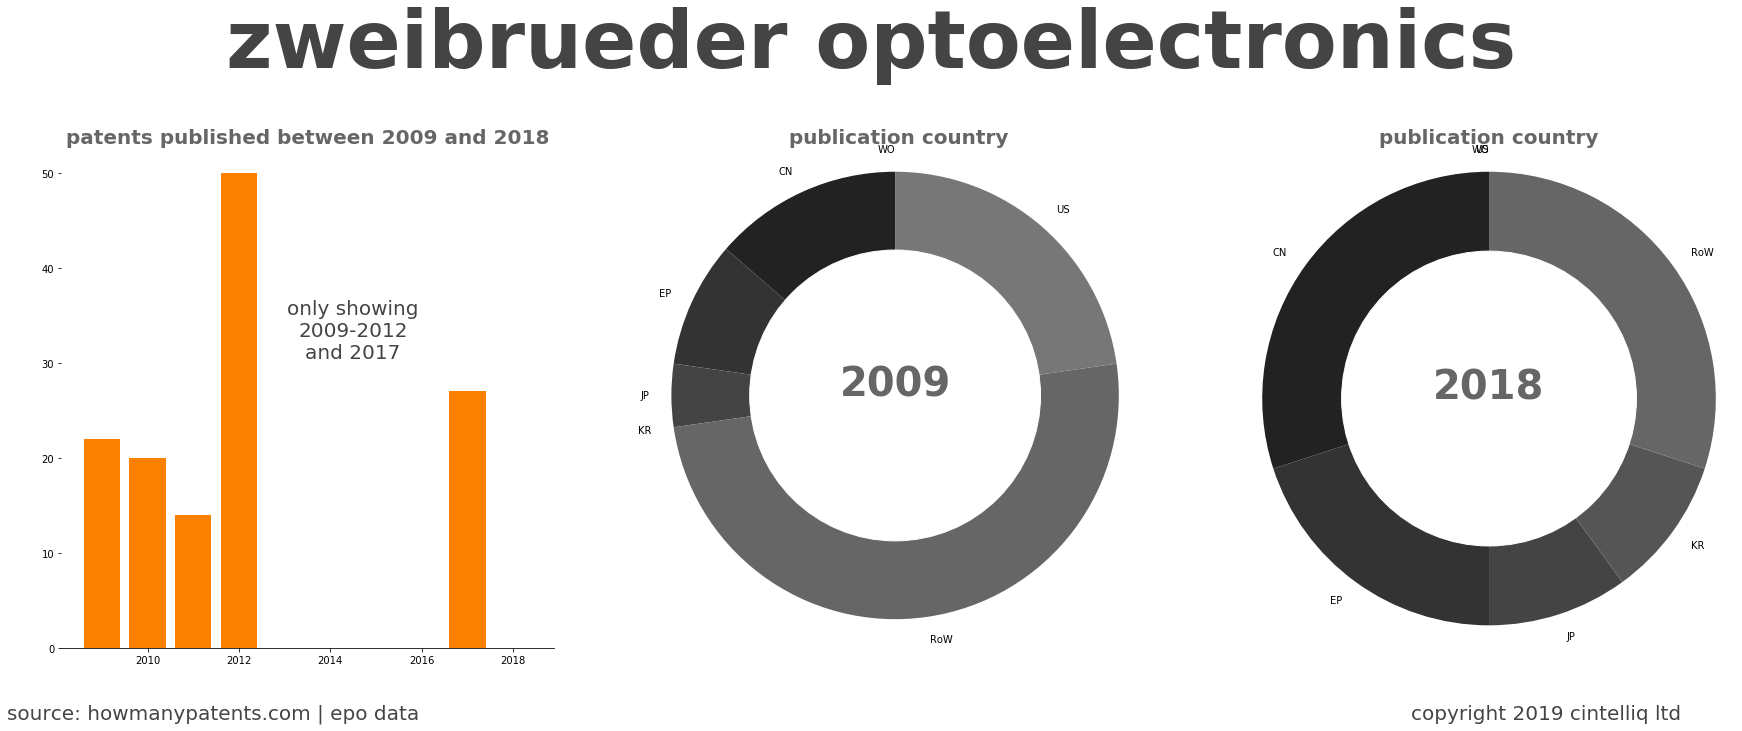 summary of patents for Zweibrueder Optoelectronics